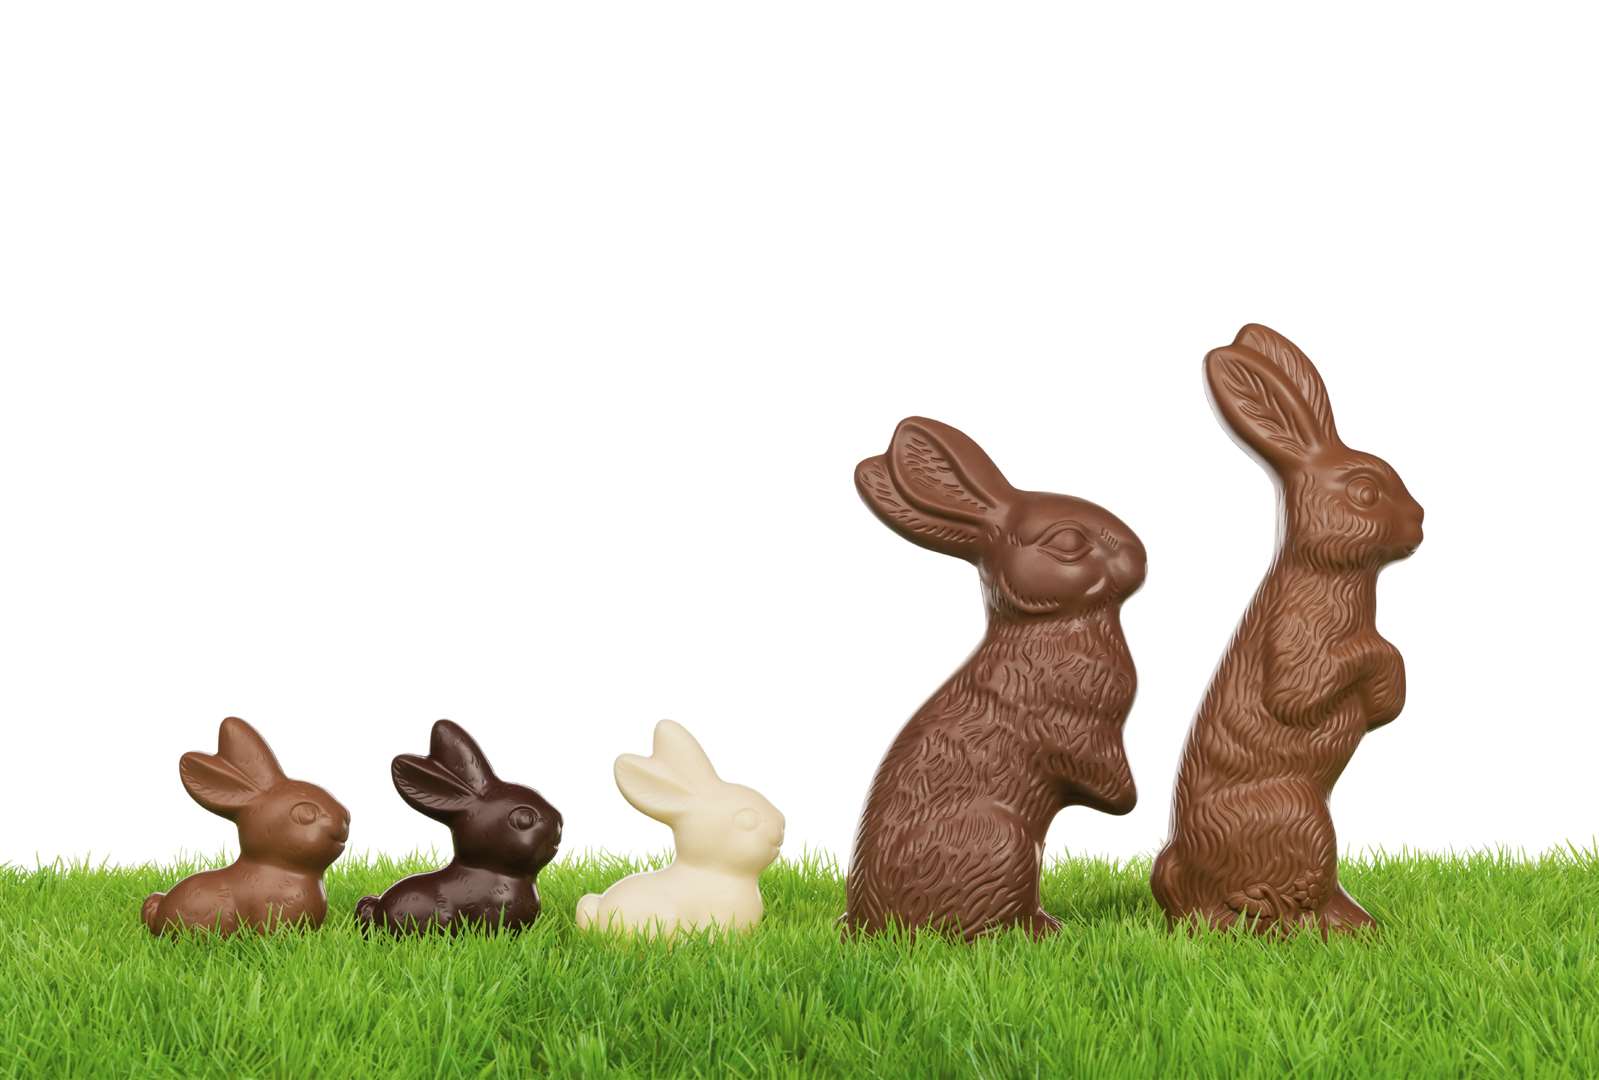 Fancy a hunt for a chocolate treat?